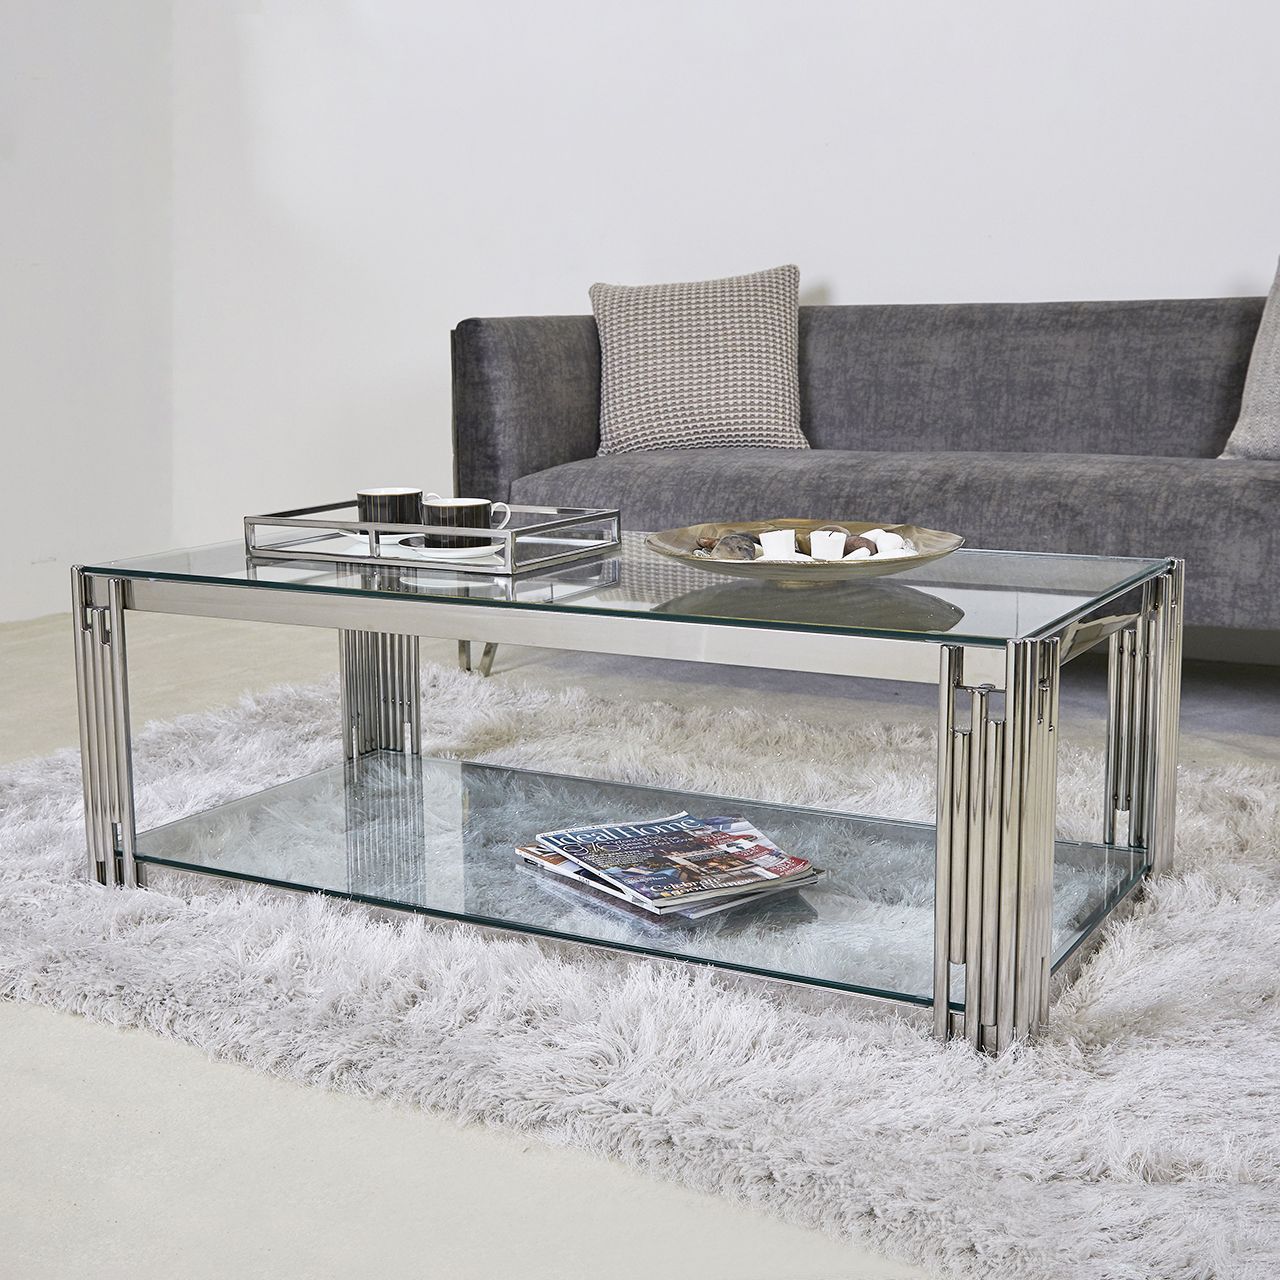 Hayden Glass Stainless Steel Coffee Table Intended For Glass And Stainless Steel Console Tables (View 2 of 20)